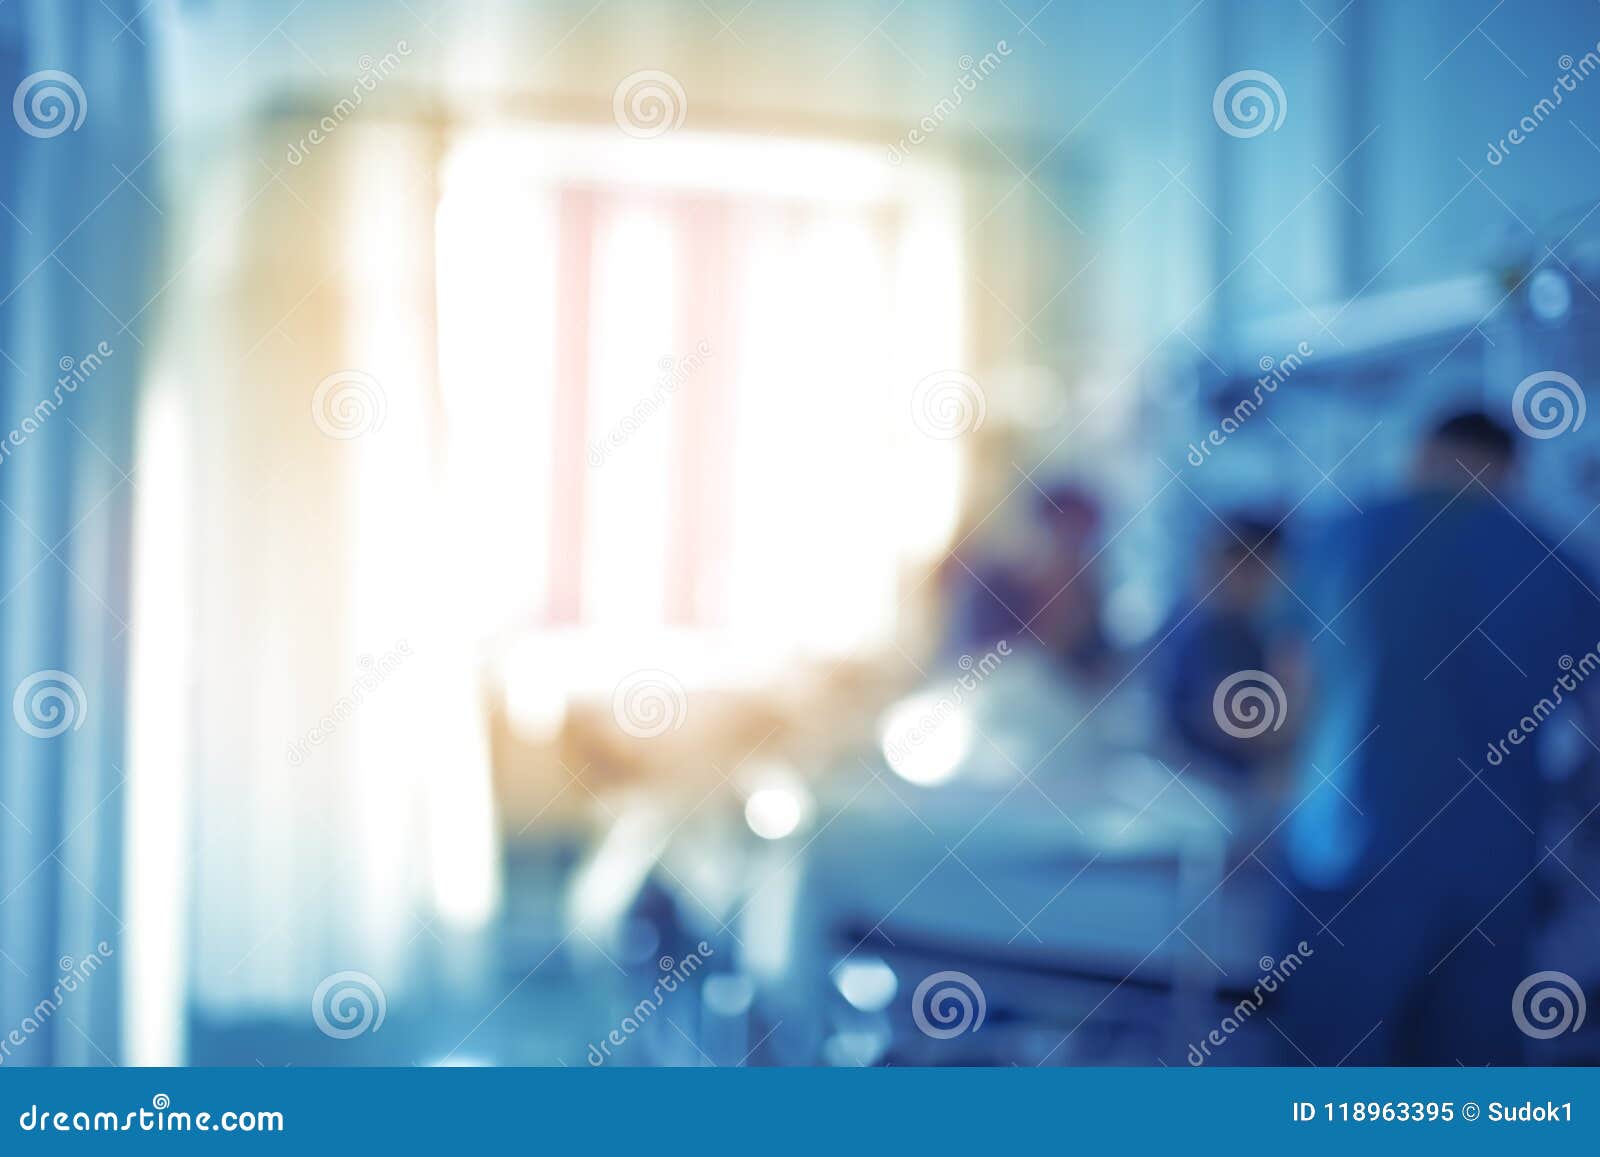 medical workers at the patient`s bed in a sunlit room, unfocused